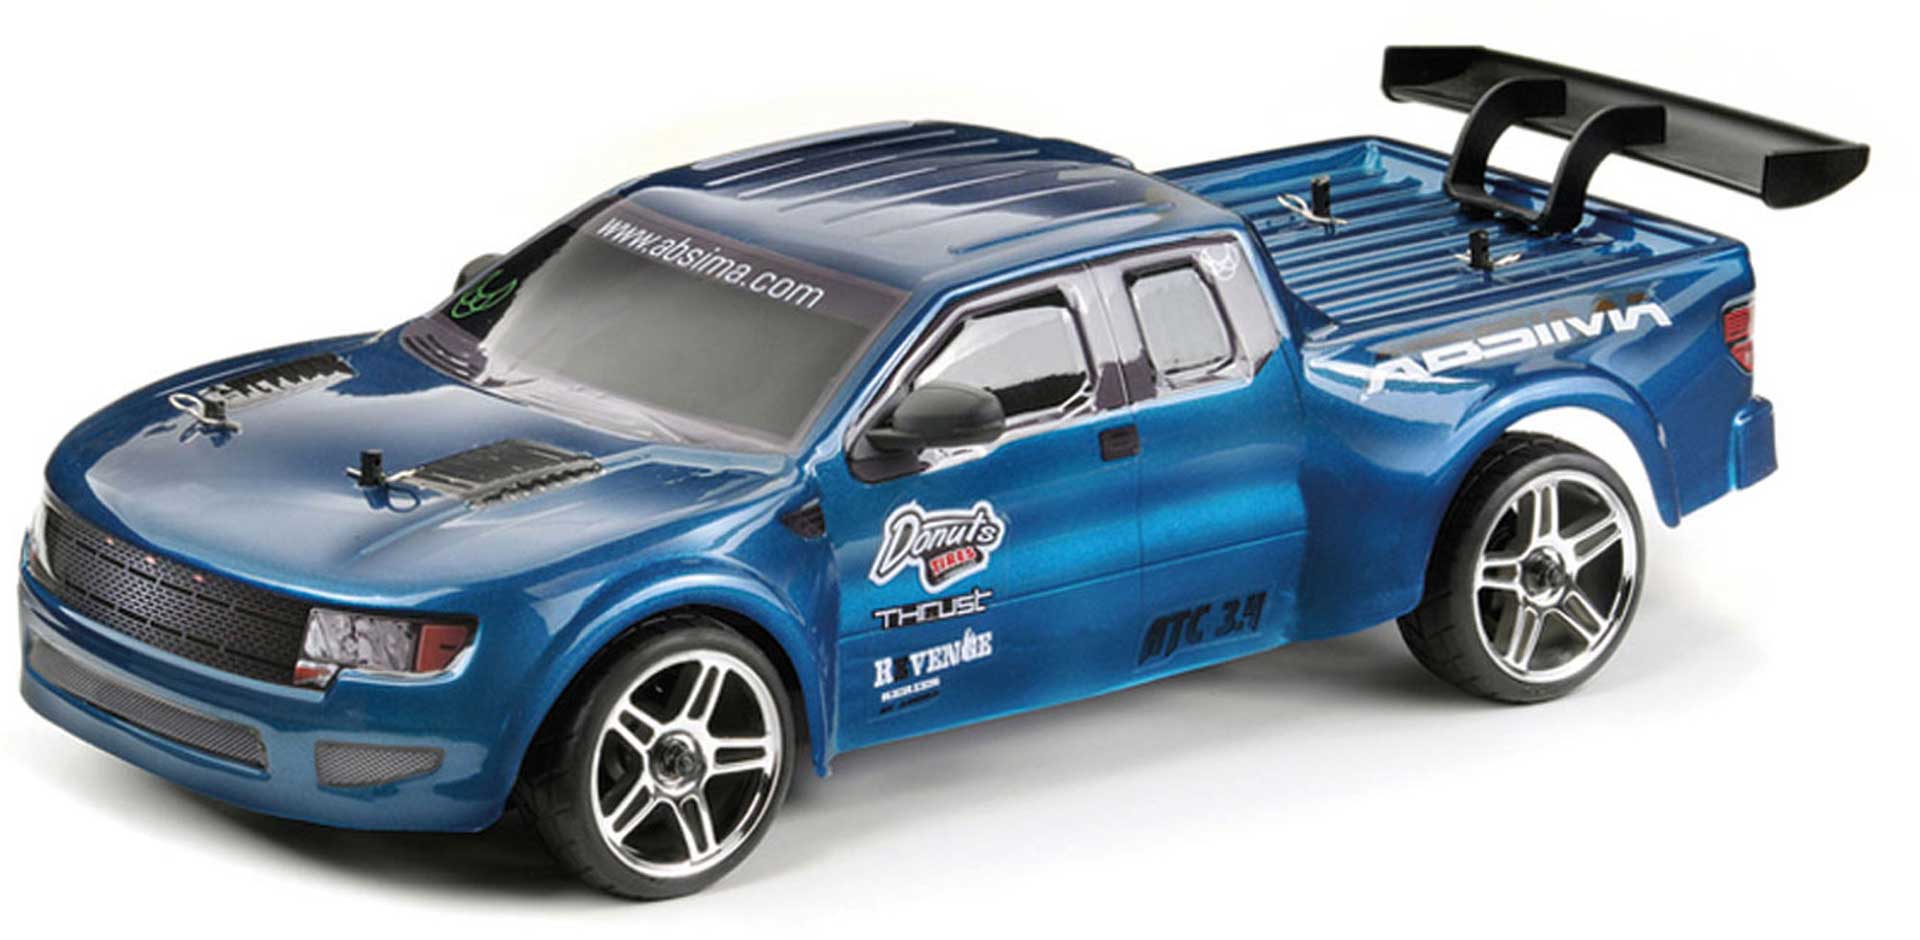 ABSIMA ATC 3.4 HOT SHOT TOURING CAR 4WD 1/10 RTR WITH BATTERY AND CHARGER